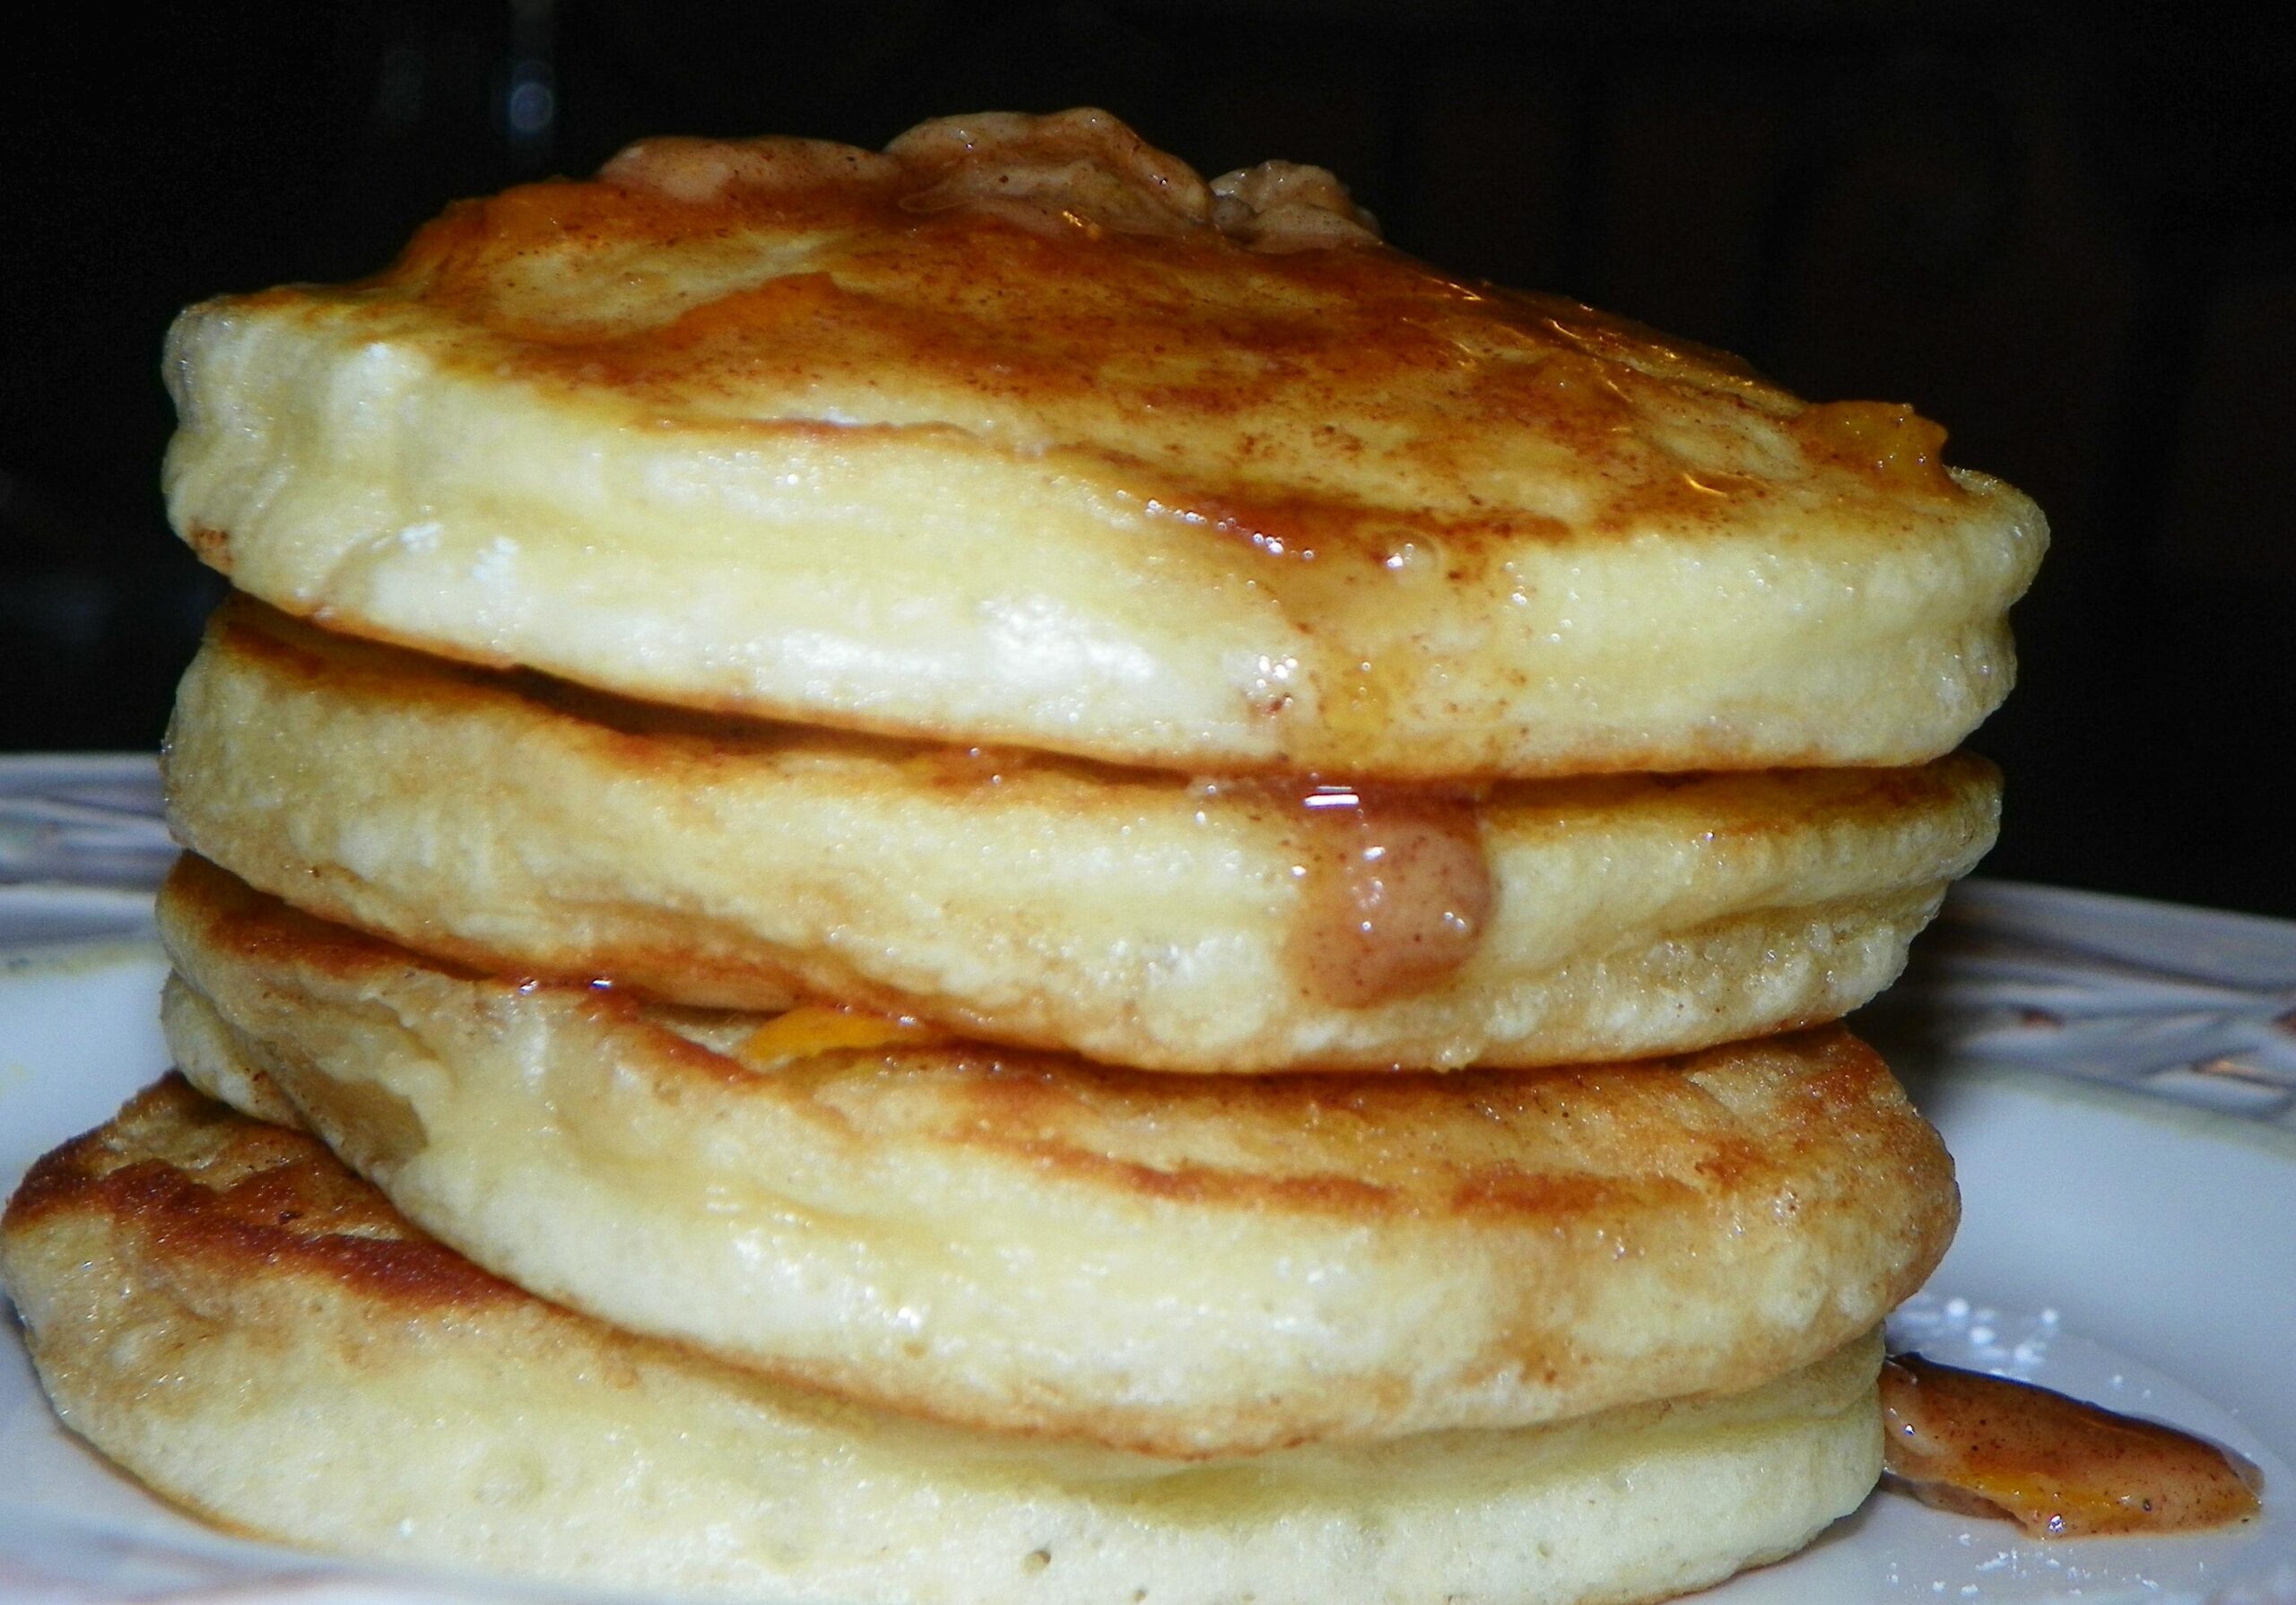  Satisfy your sweet tooth with a stack of these heavenly Scottish pancakes!